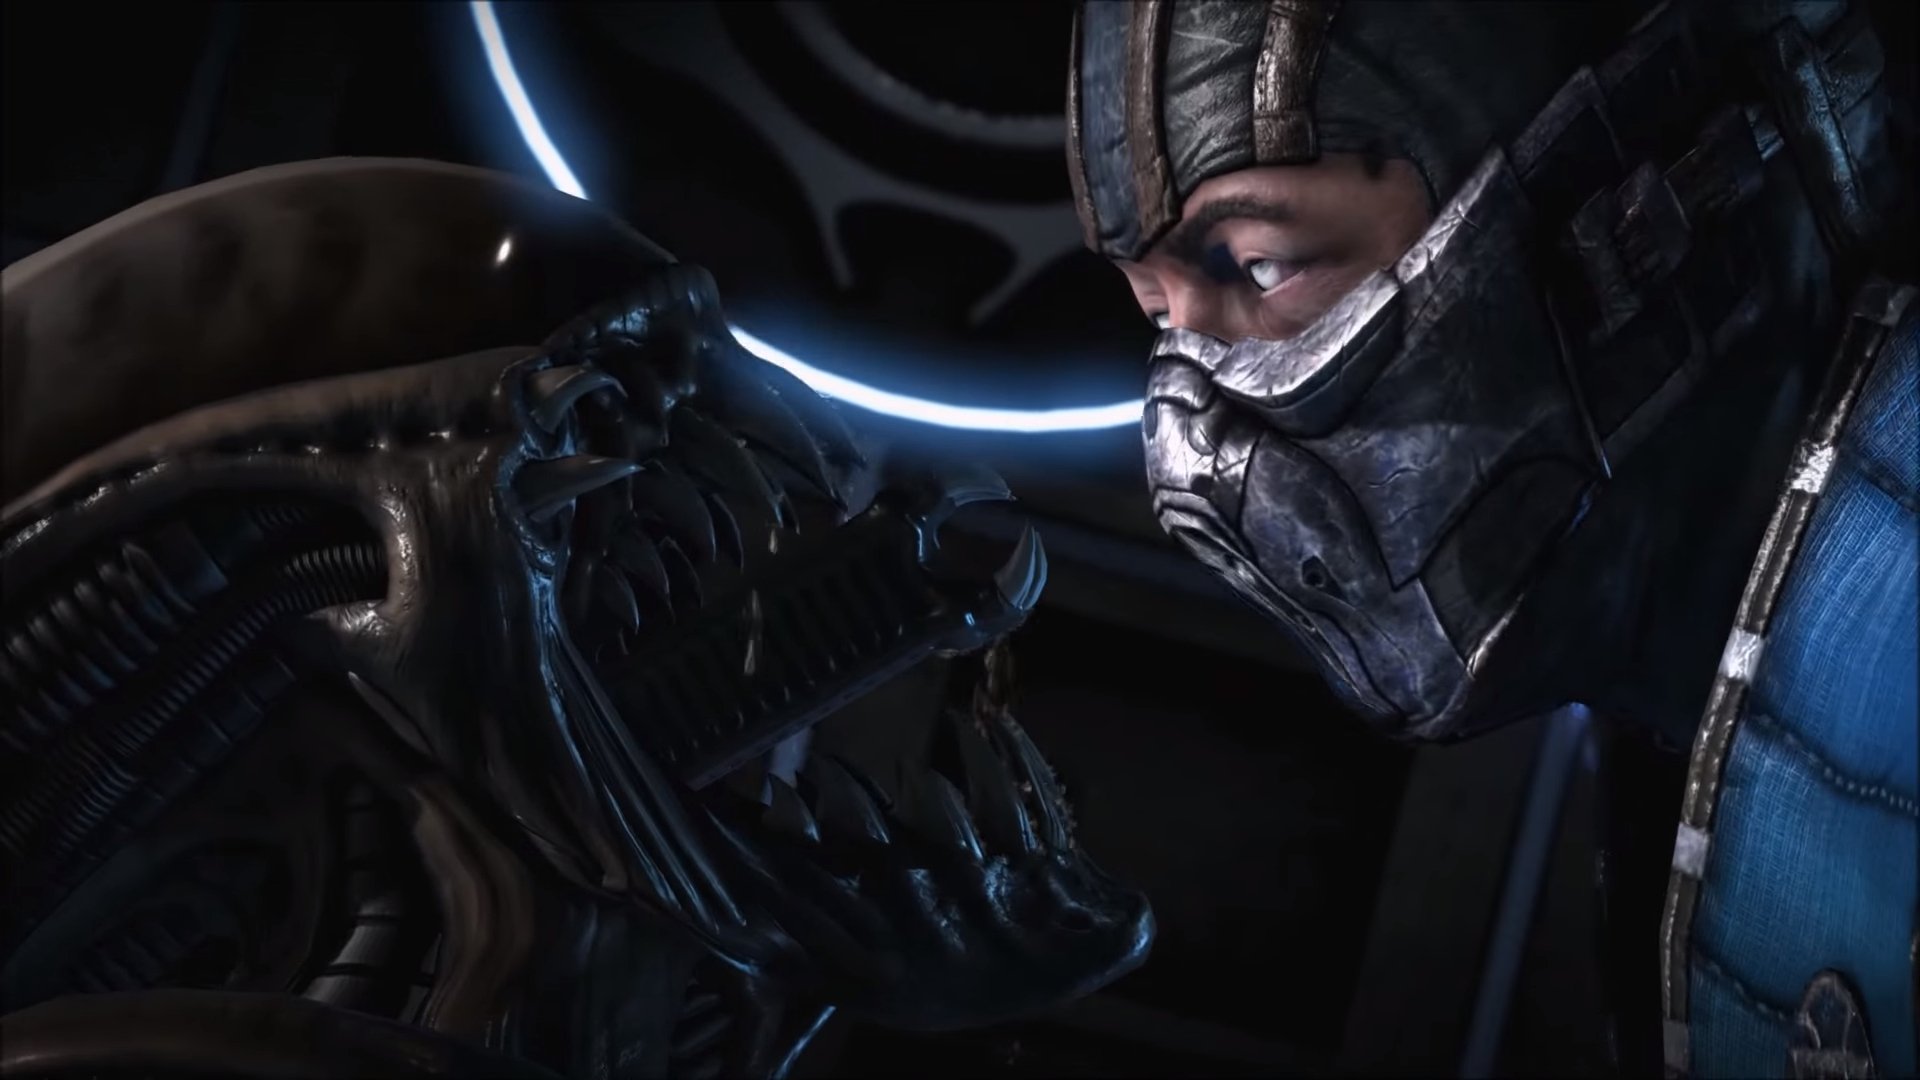 Mortal Kombat XL includes every DLC character from last year's